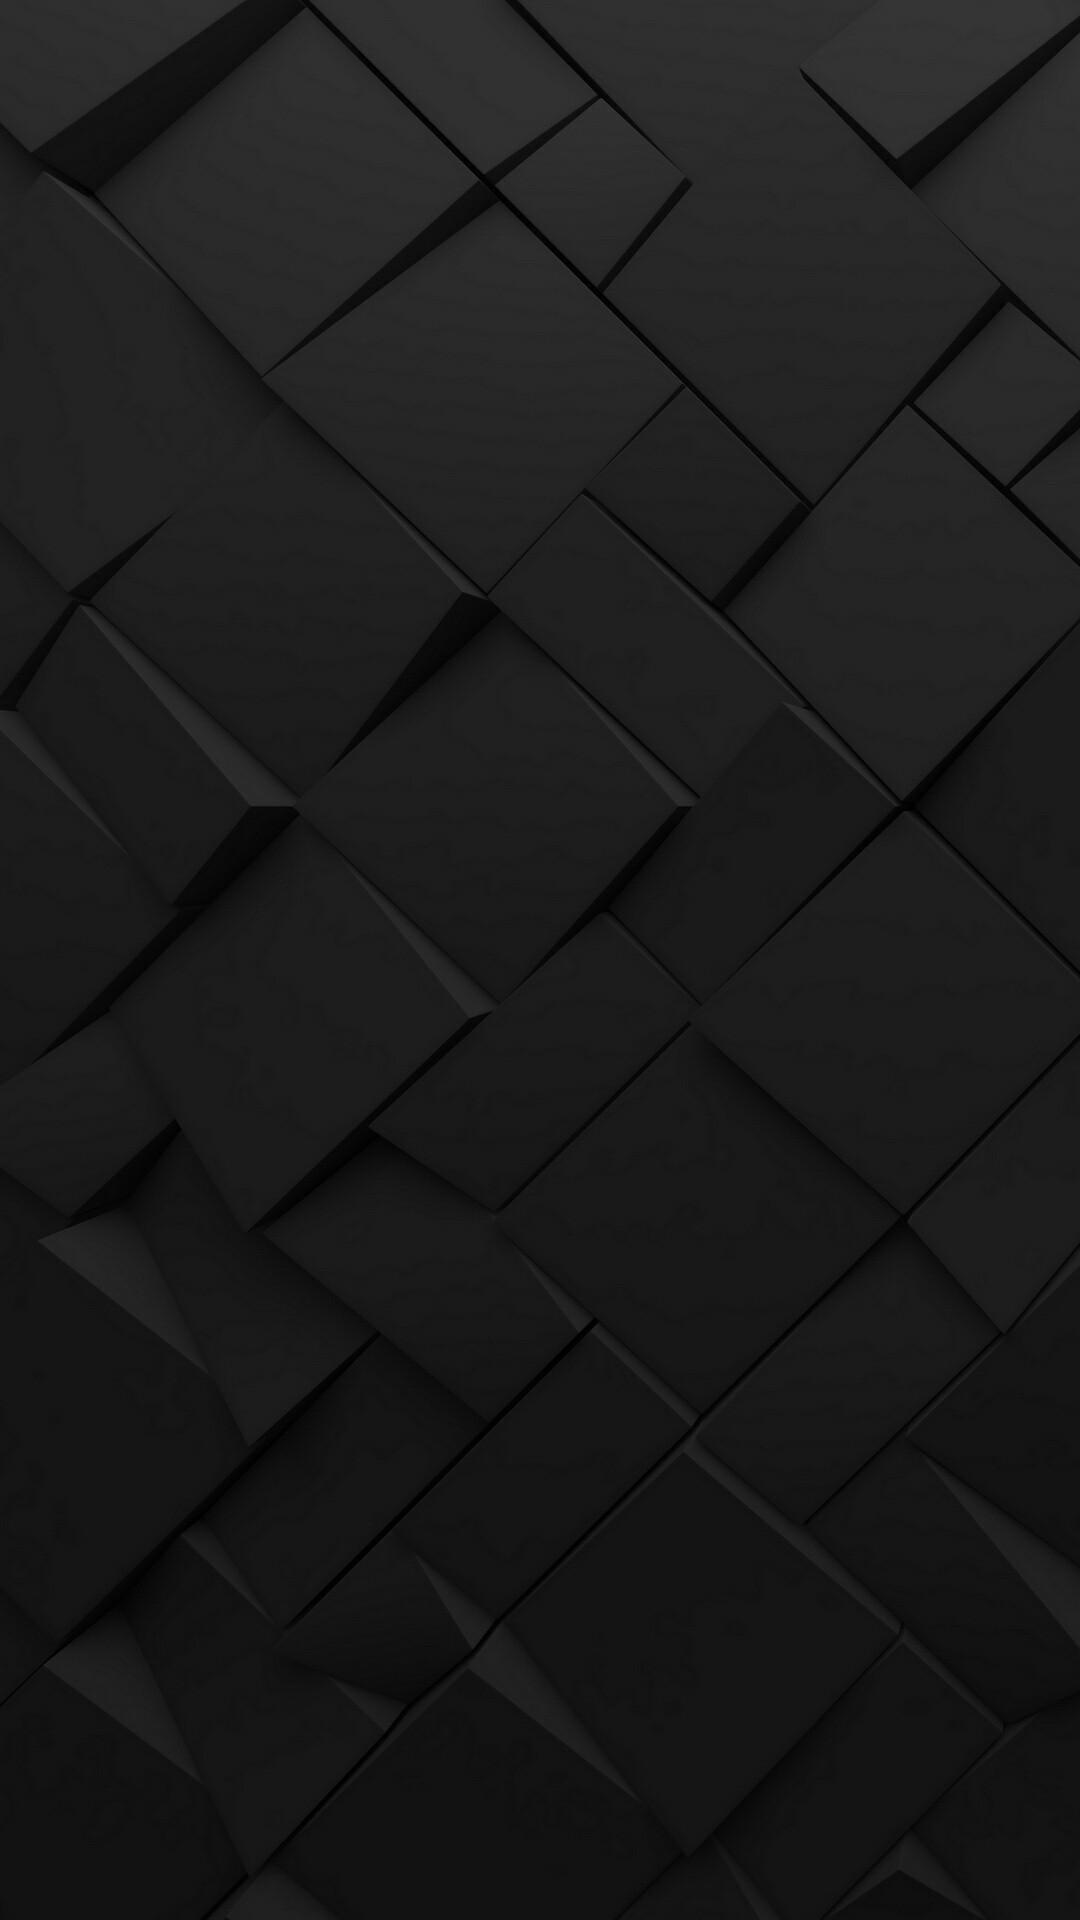 Hd Android Black Wallpapers - Wallpaper Cave